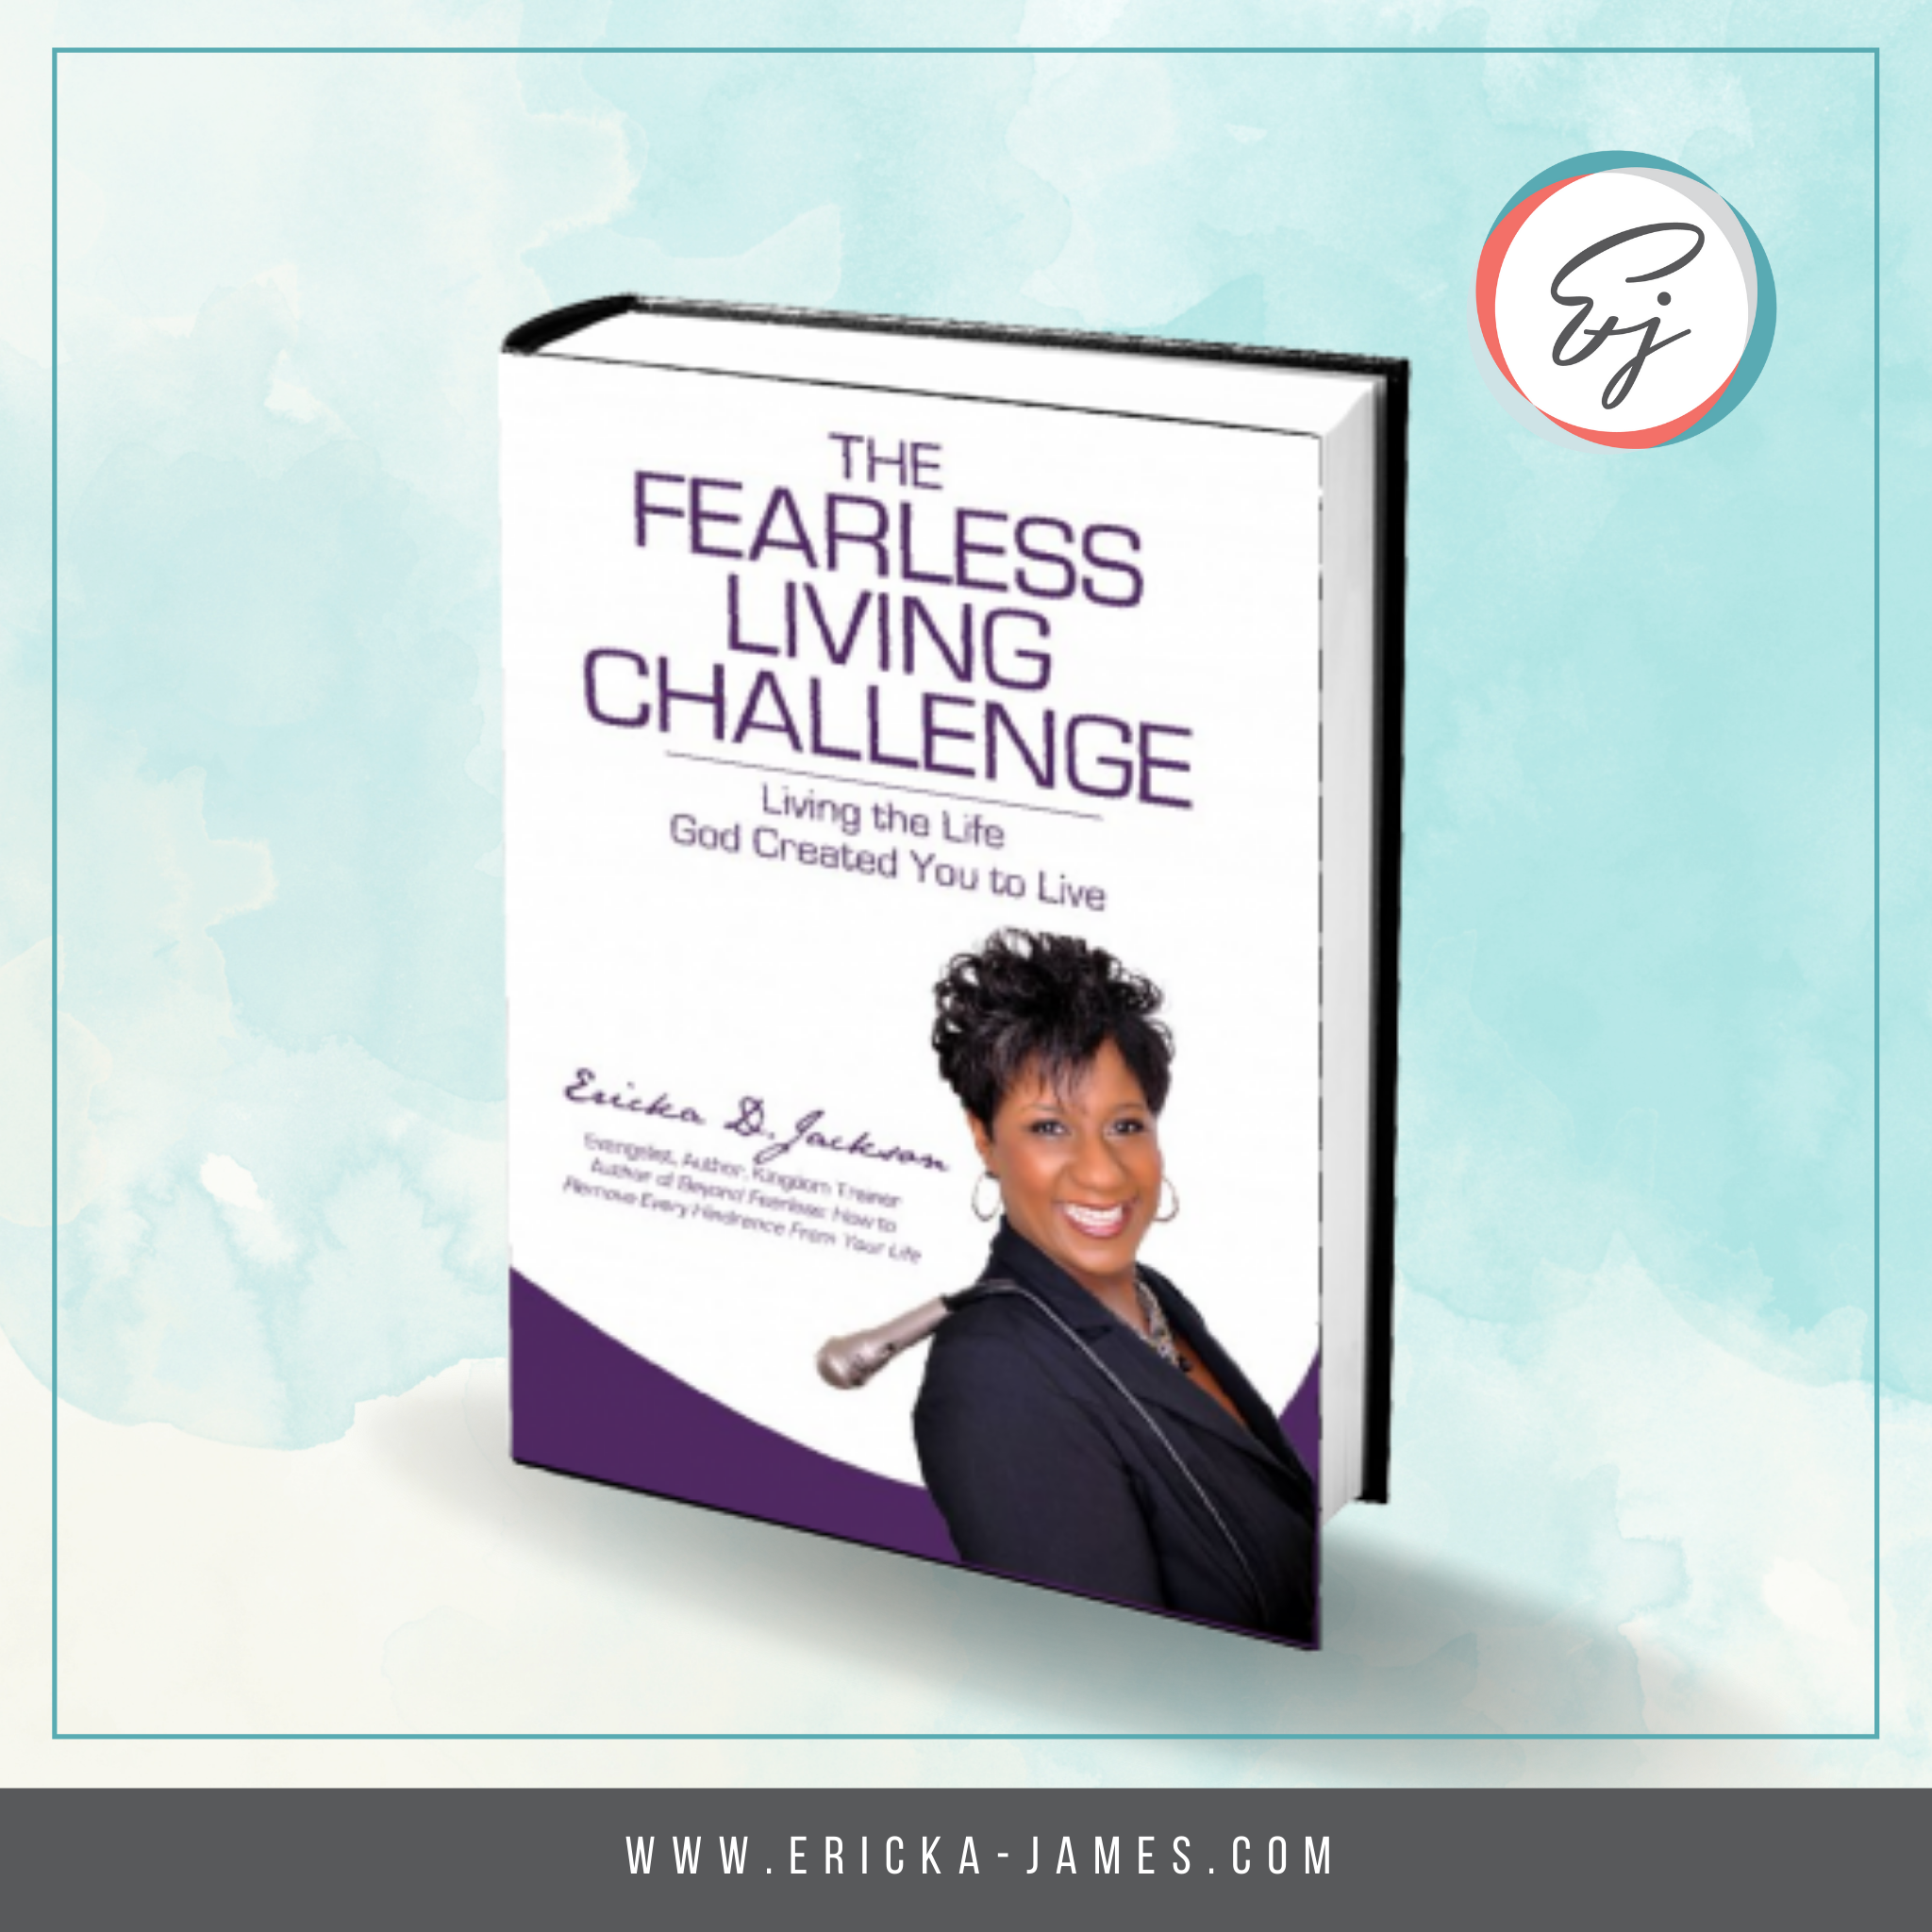 The Fearless Living Challenge book